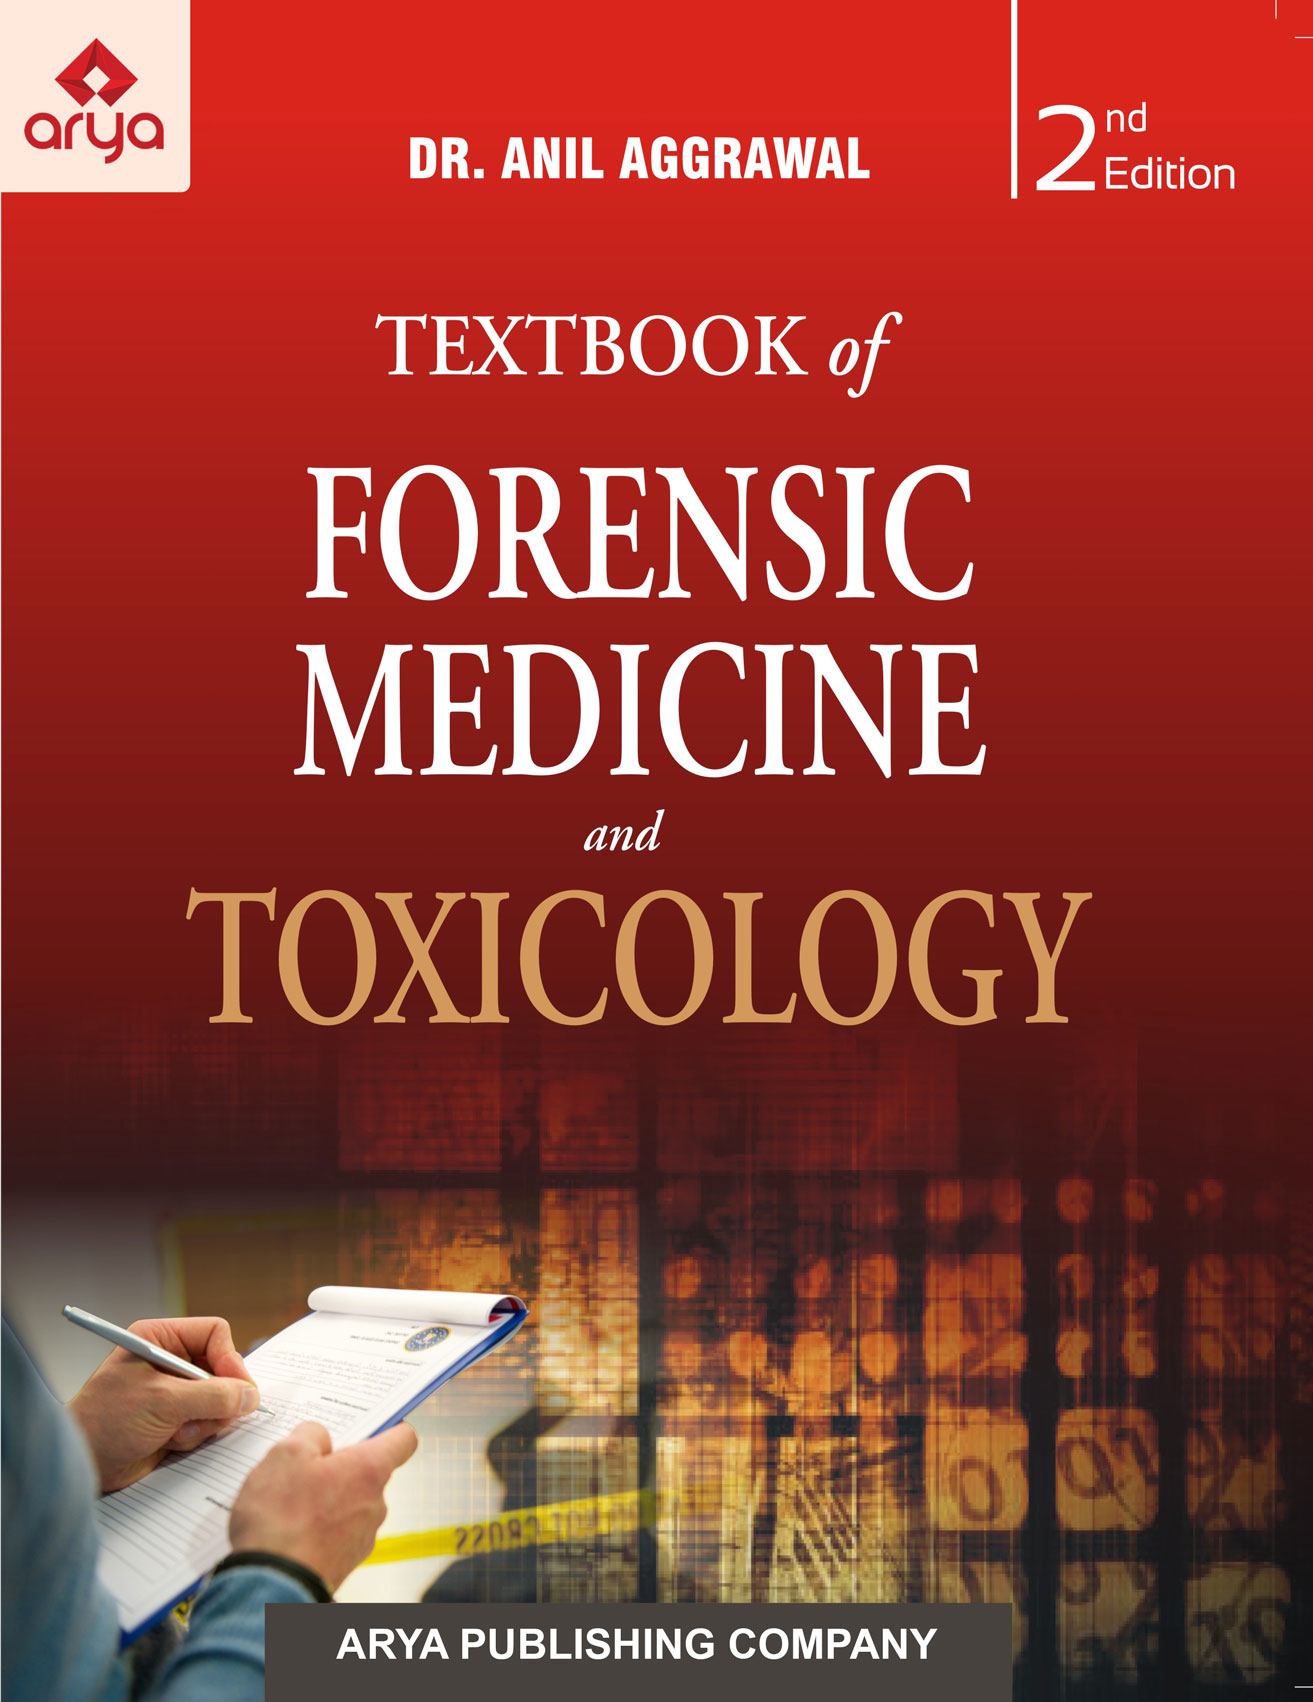 Textbook of Forensic Medicine and Toxicology 